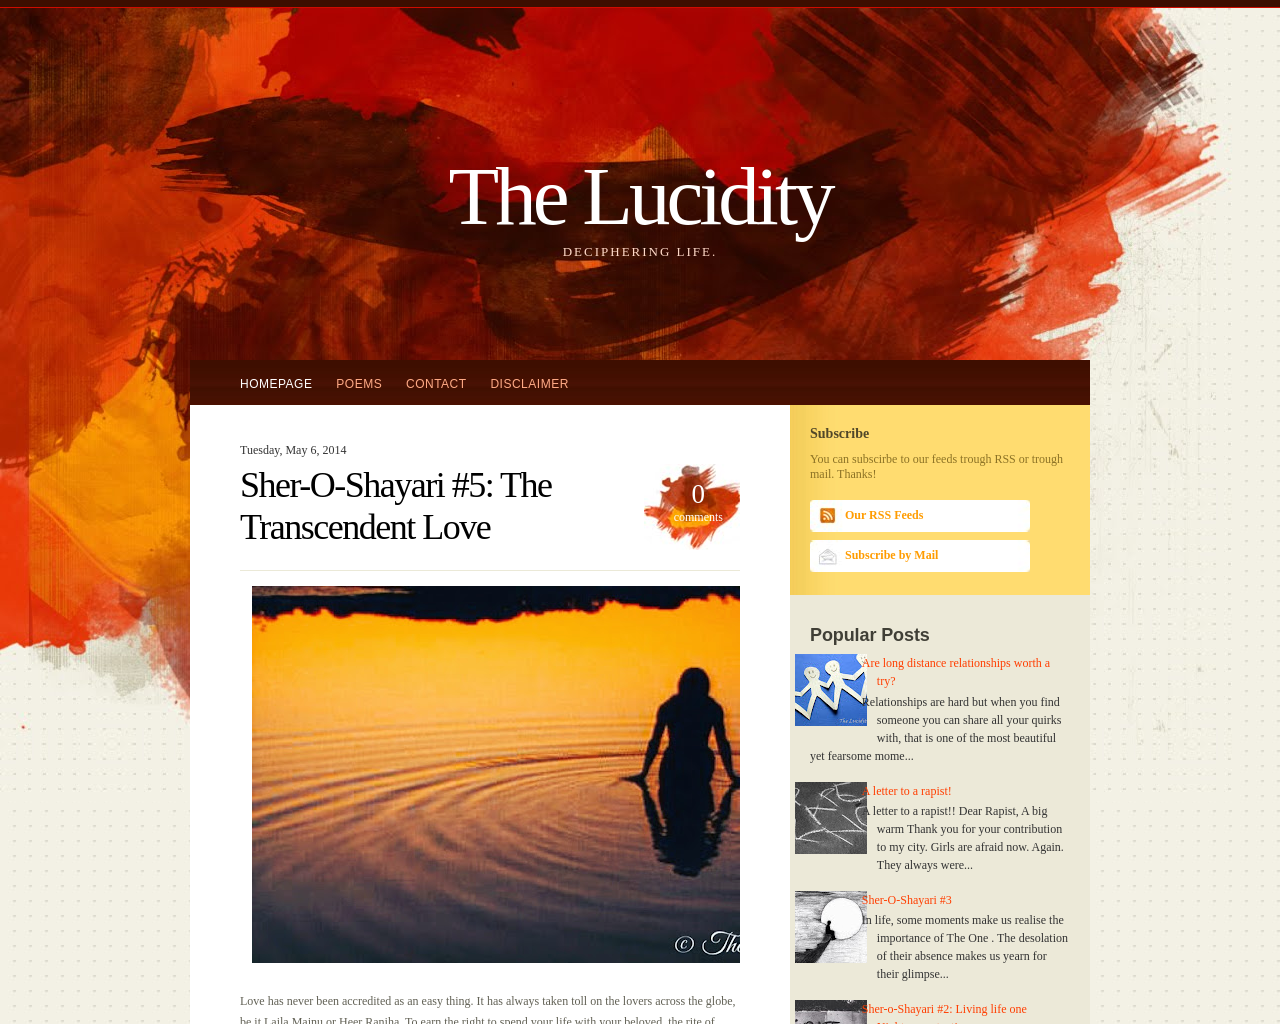 The Lucidity